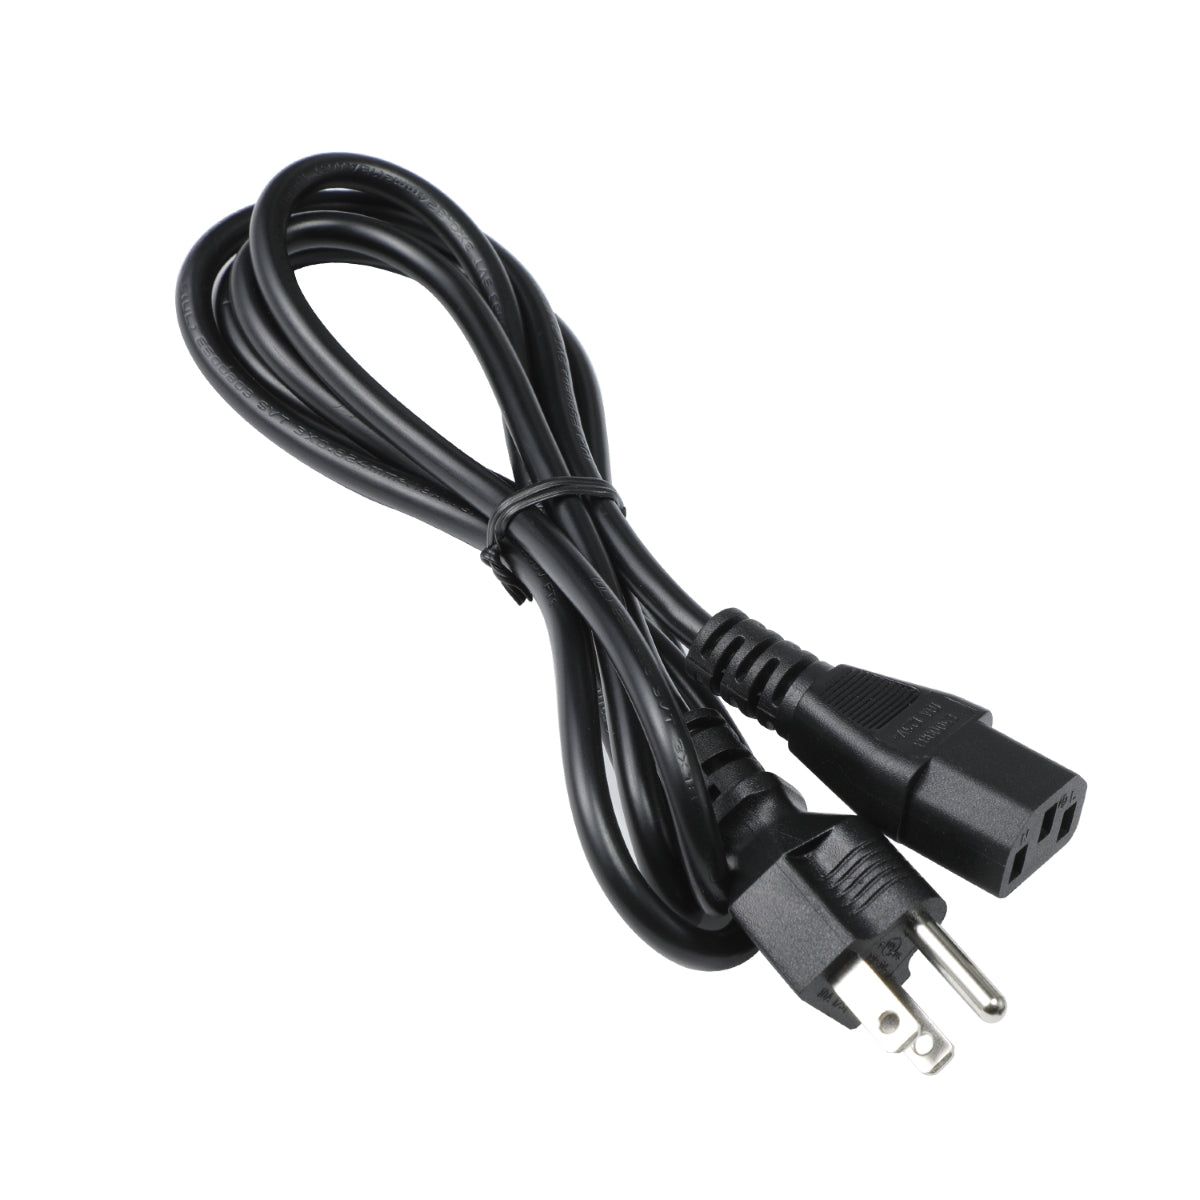 Power Cord for Dell U2719D Monitor